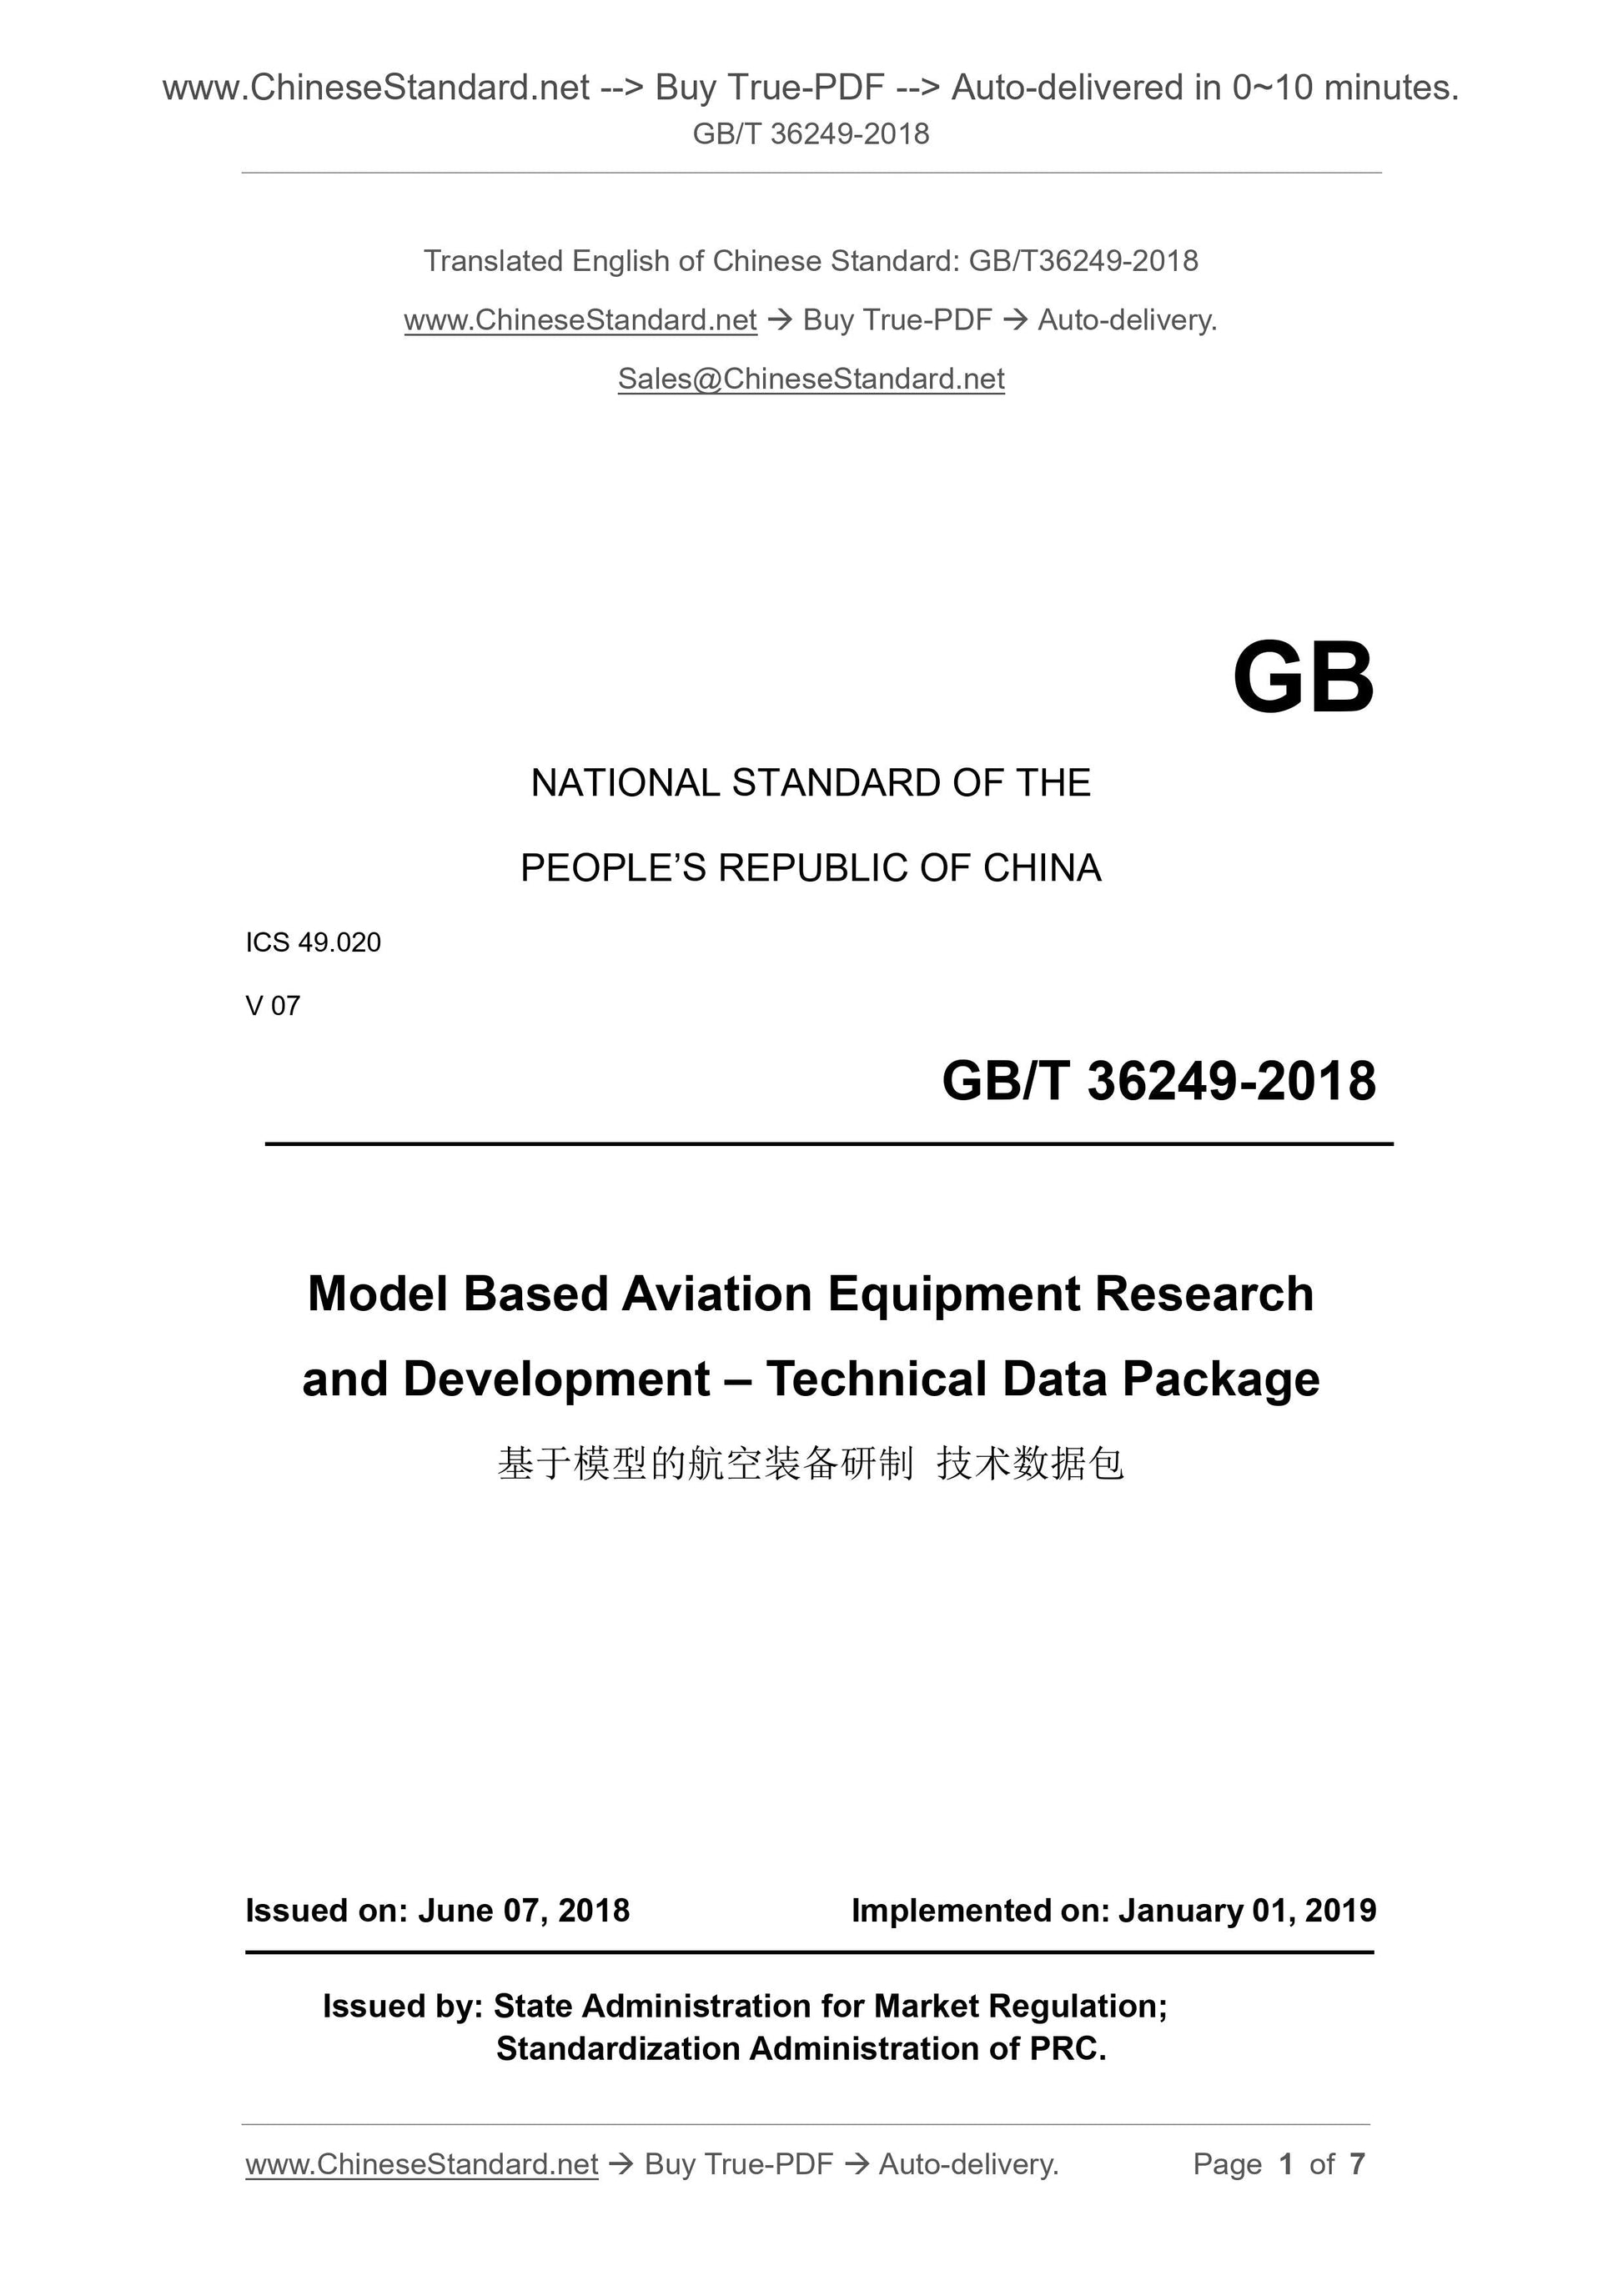 GB/T 36249-2018 Page 1